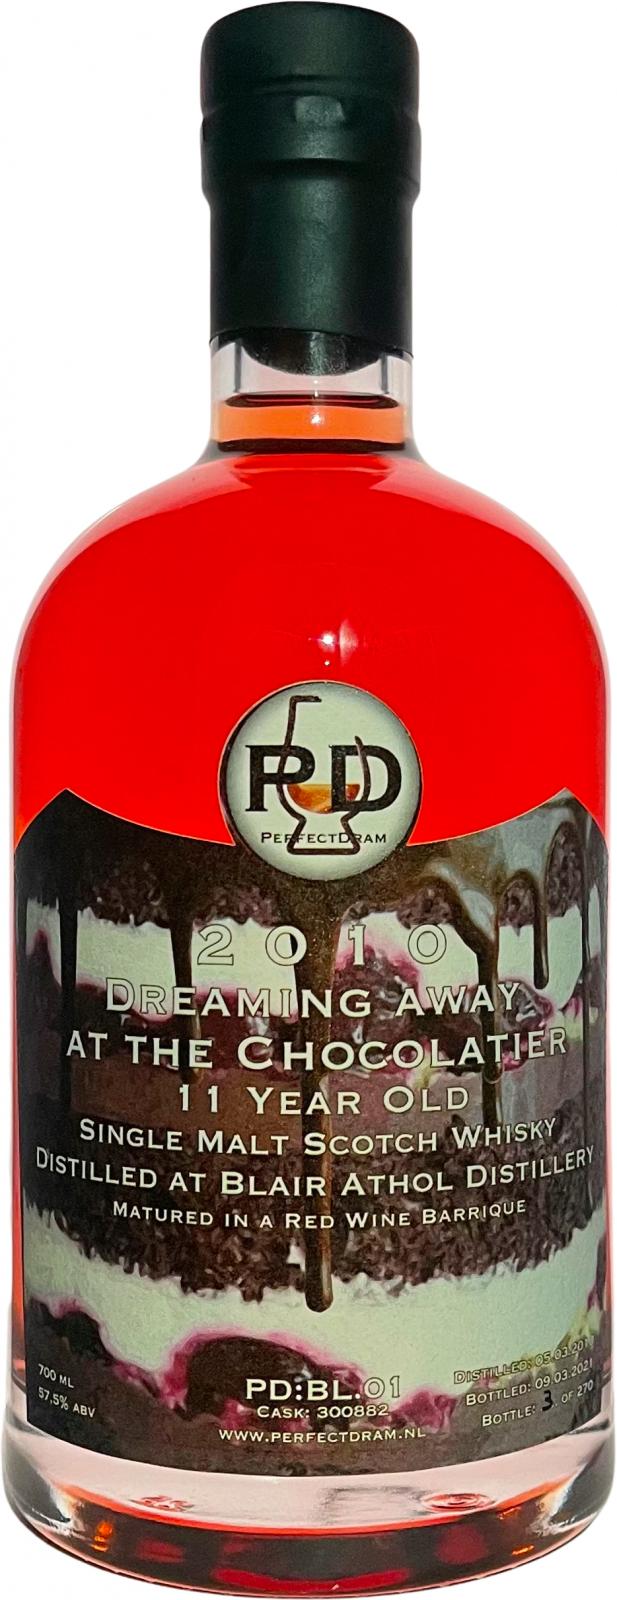 Blair Athol 2010 PDnl Dreaming Away at the Chocolatier PD:BL.01 Red Wine Barrique #300882 57.5% 700ml